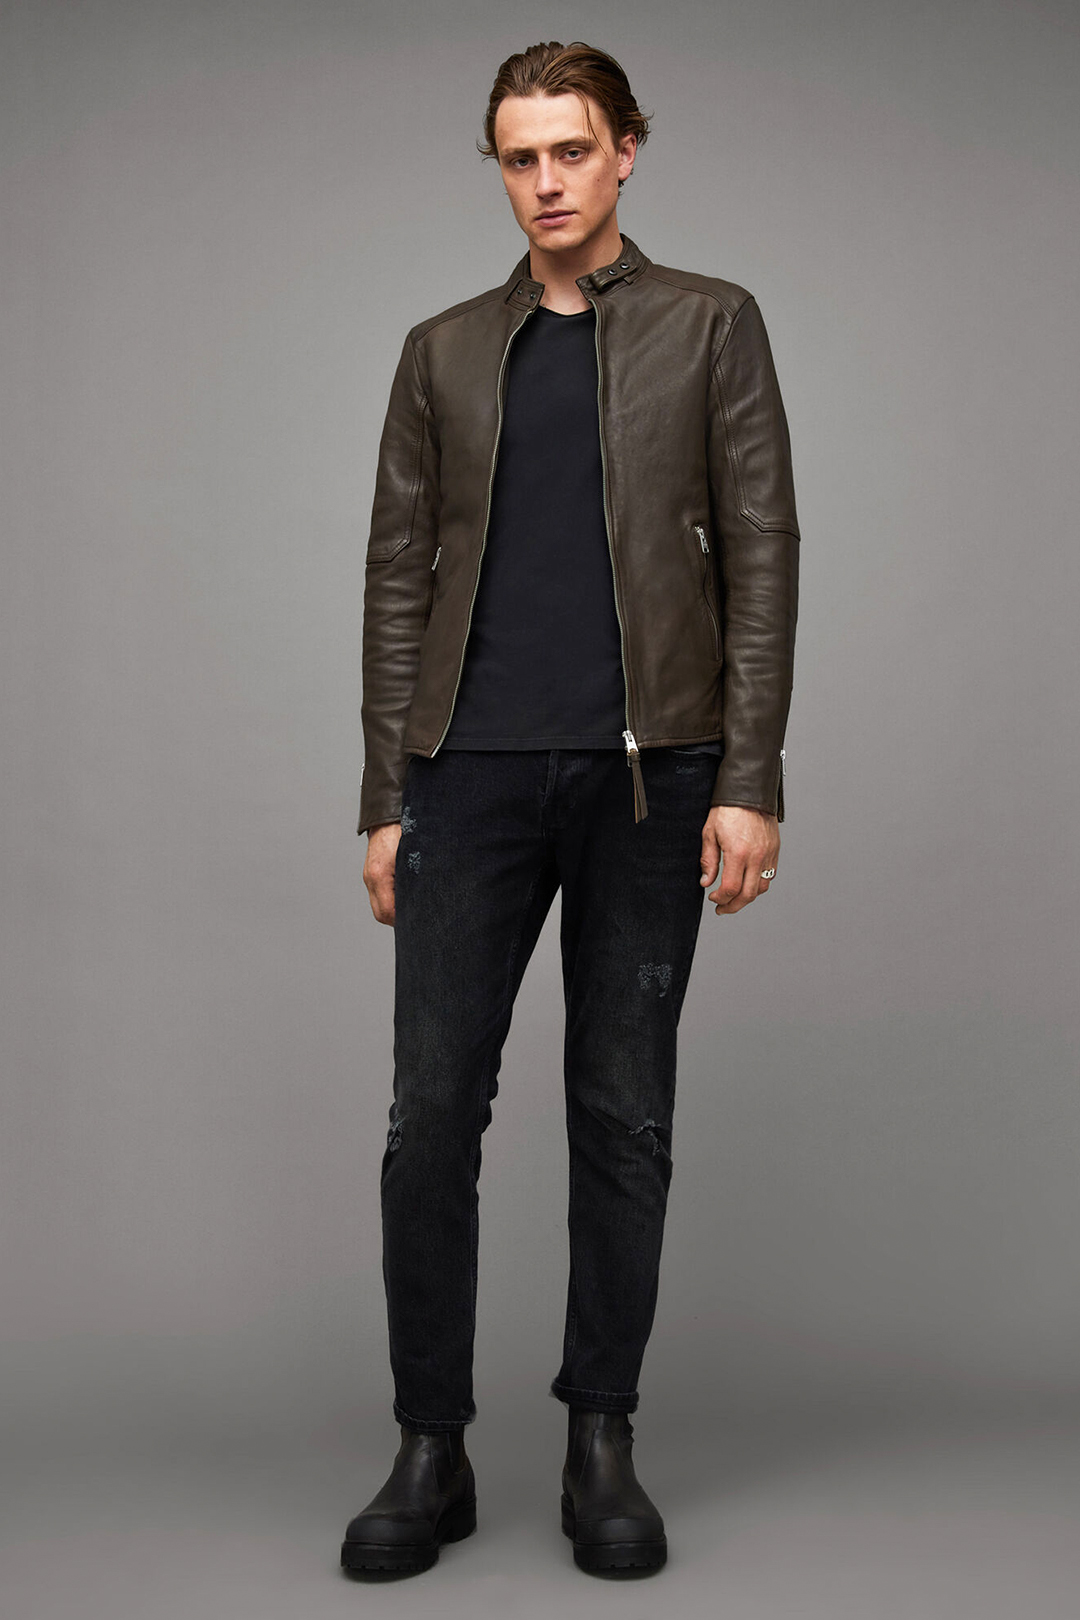 10 Stylish Leather Brown Jacket Outfits for Men – Outfit Spotter